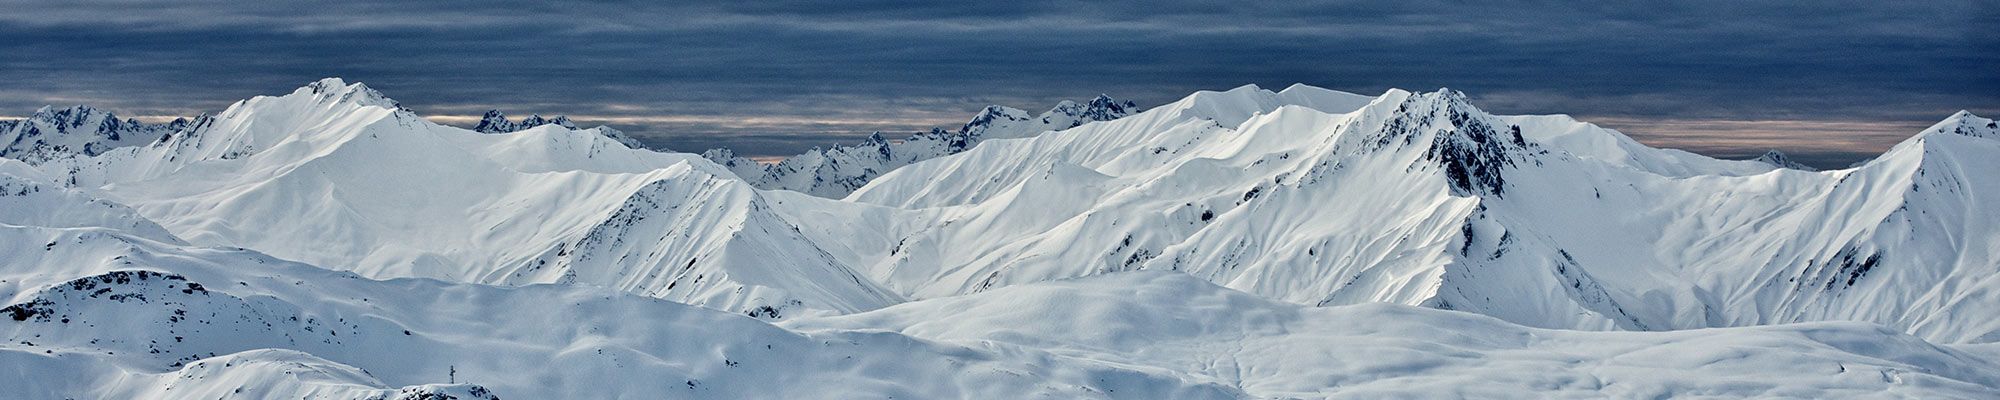 Avalanche, Ski, Alpine & Polar Instruments for Cold Region Monitoring and Research